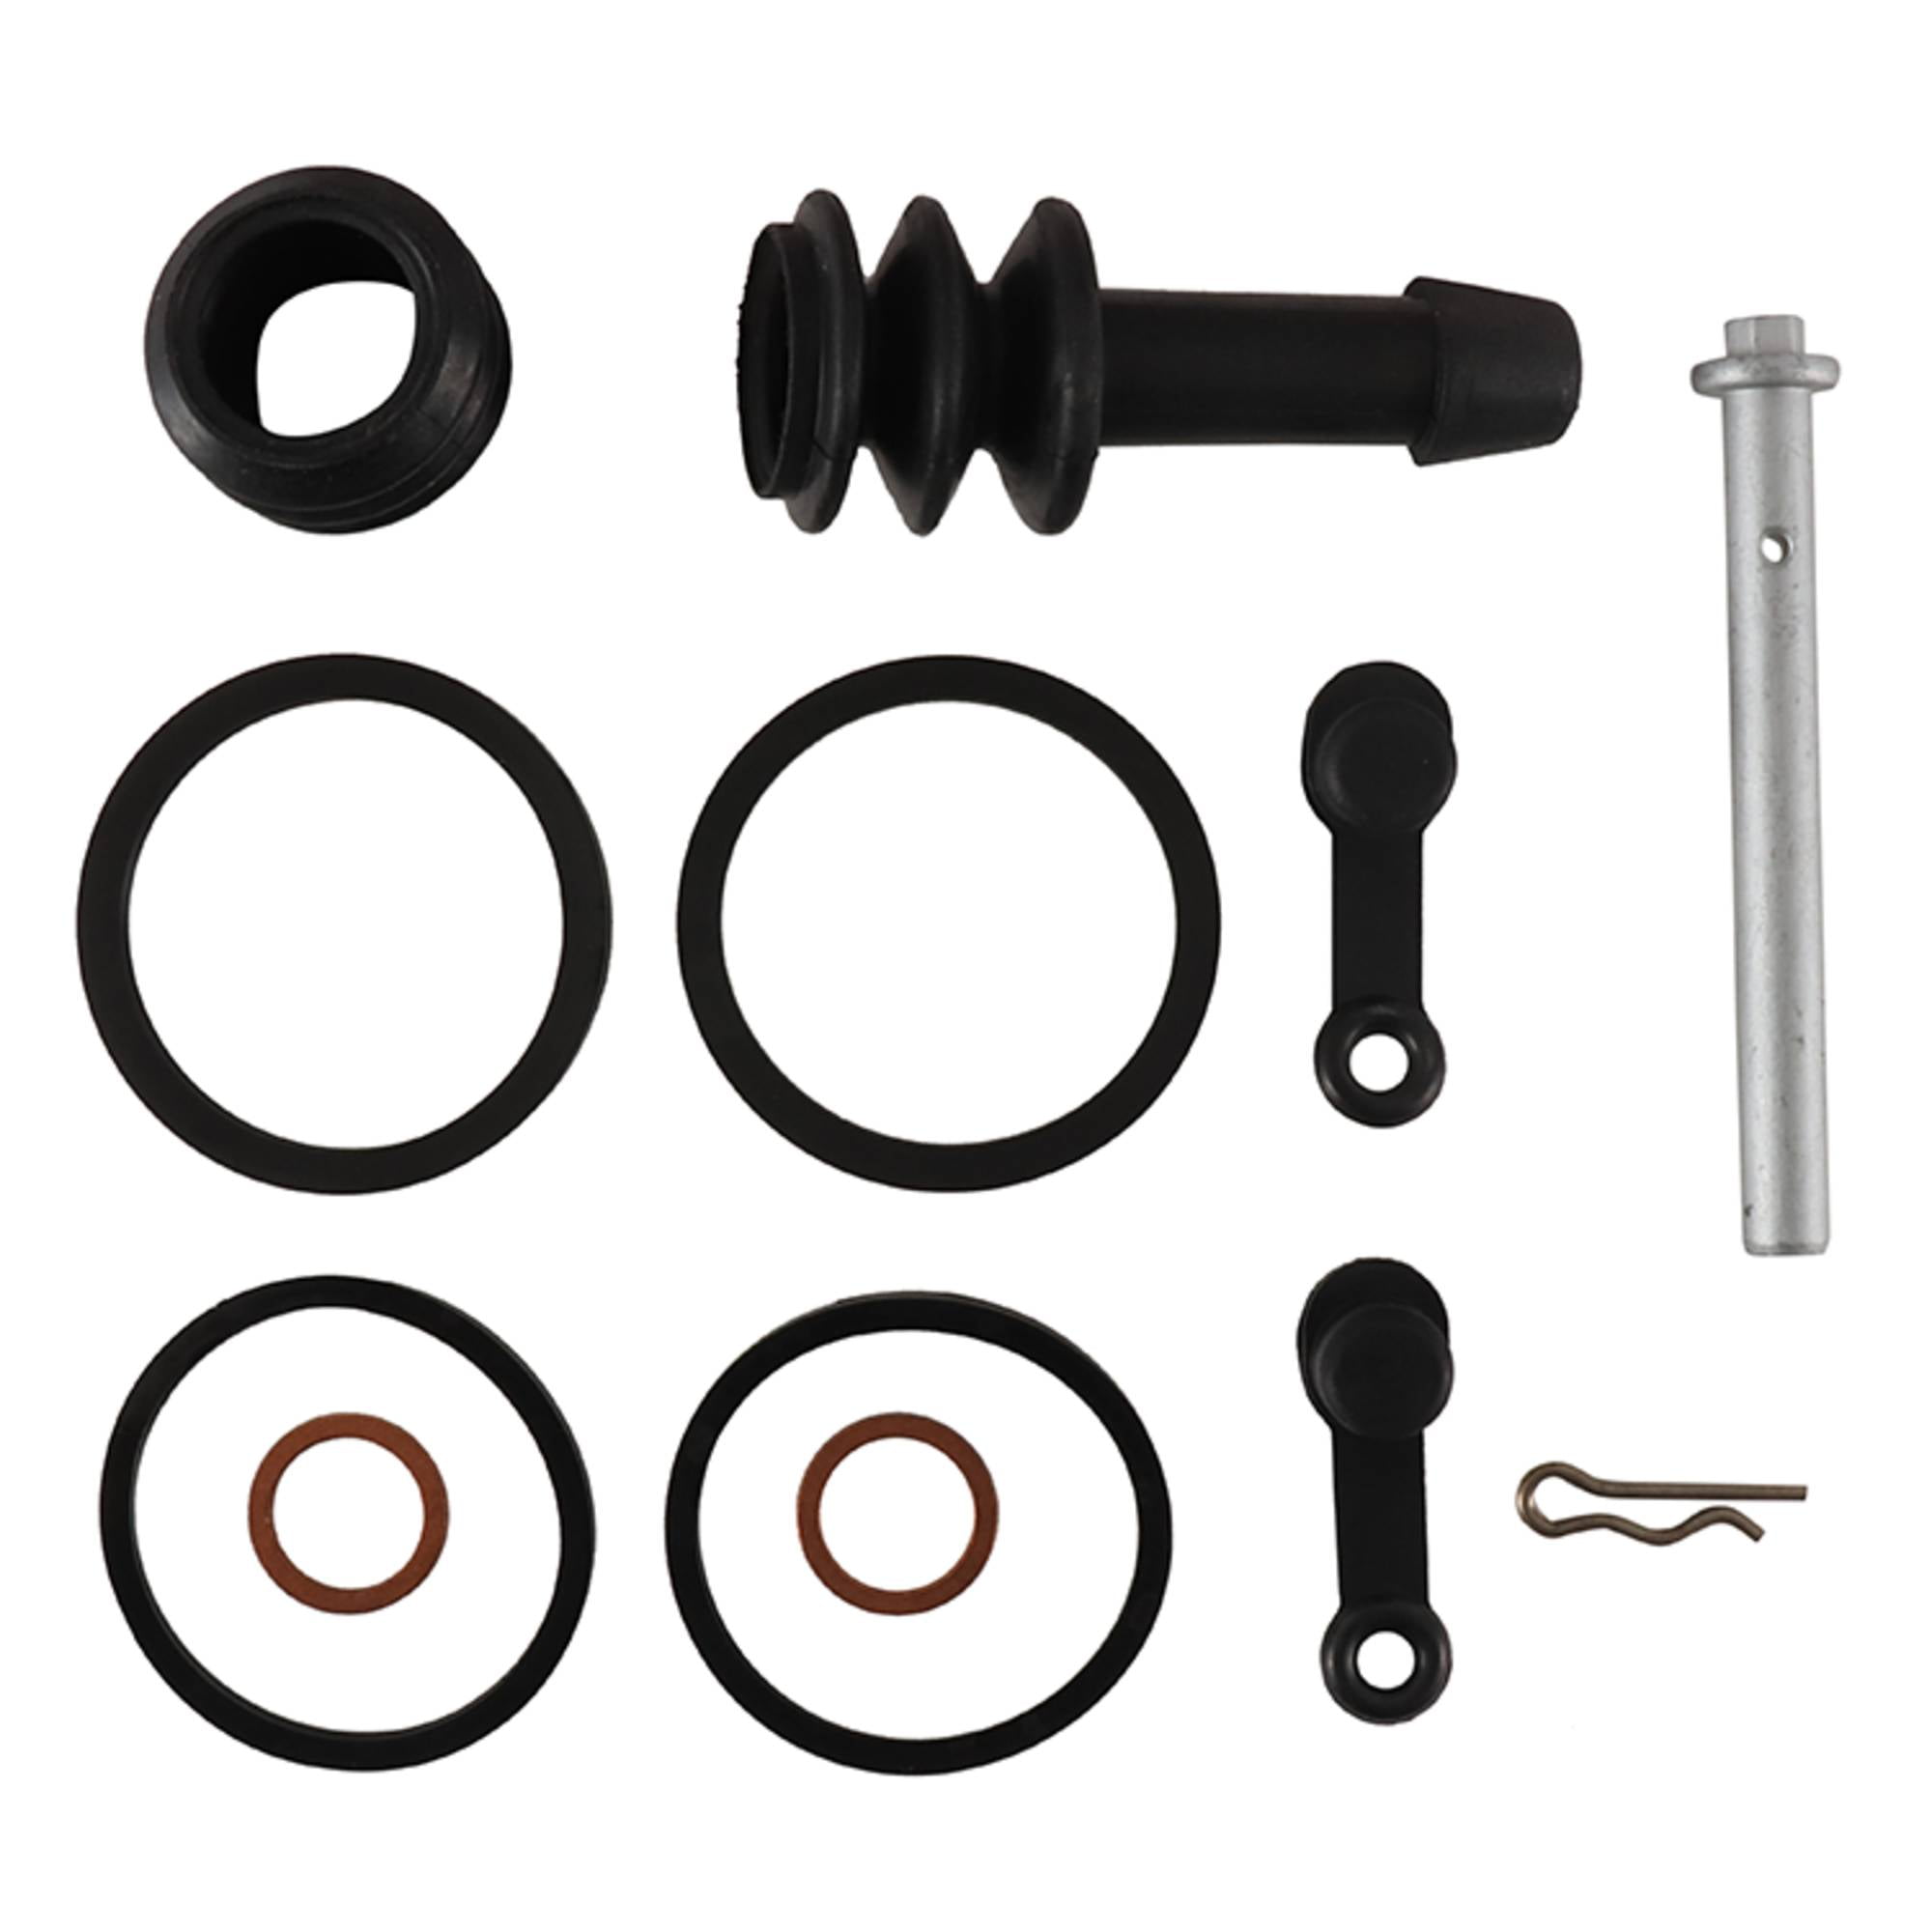 VN 1700 D Nomad ABS 14 VN 1700 C Nomad 09-13 VN 1700 E Classic 09-13 All Balls Racing Caliper Rebuild Kit Rear 18-3205 Compatible With/Replacement For Kawasaki VN 1500 L Nomad 00-04 